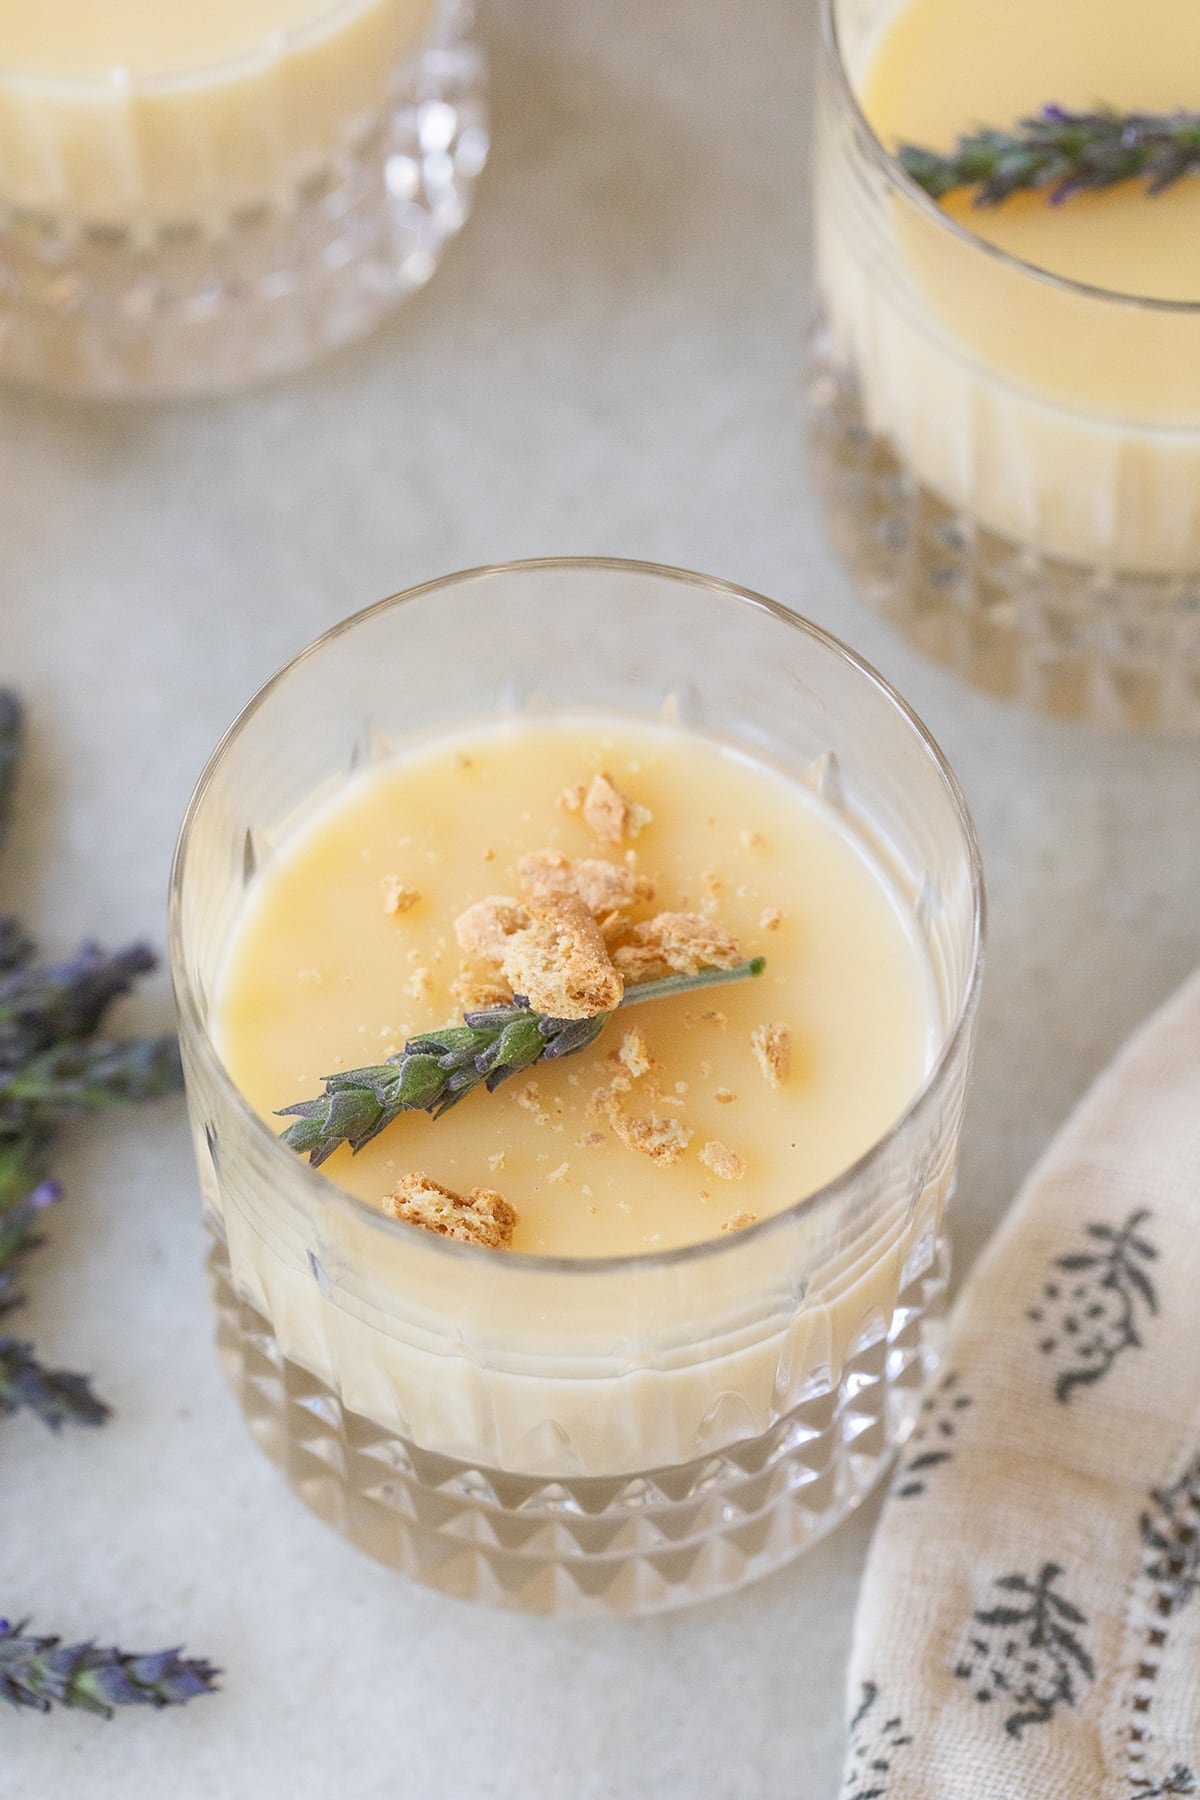 Creamy lemon pot recipe with lavender and Graham cracker topping.